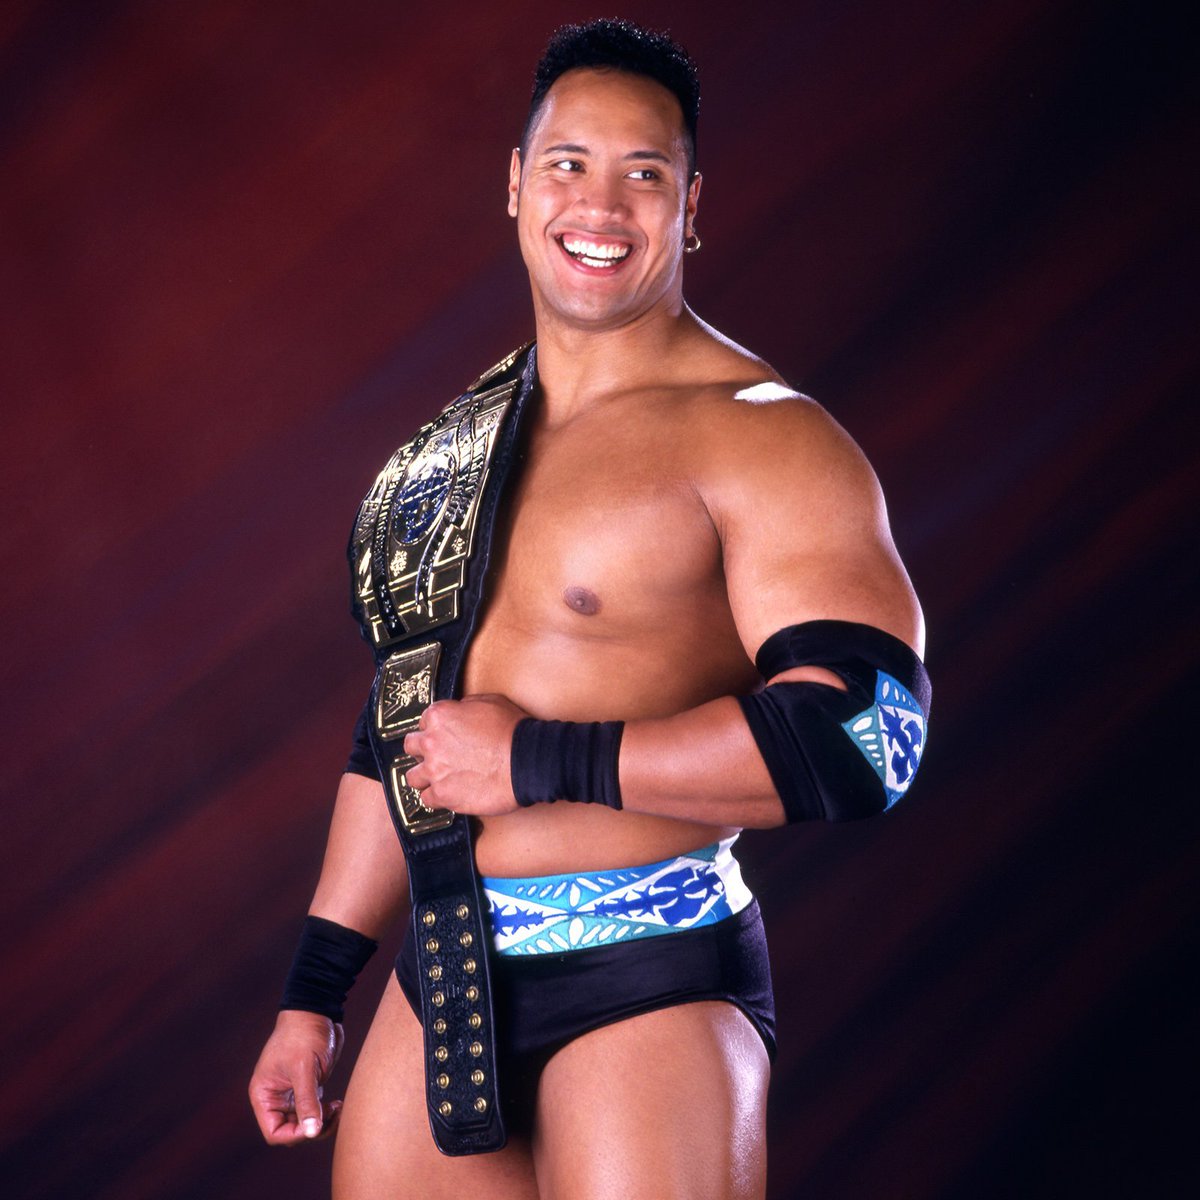 Intercontinental Champion of the day: Rocky Maivia - Won the Intercontinental title on February 13, 1997. His title reign lasted 74 days. 🏆 #WWF #WWE #Wrestling #TheRock